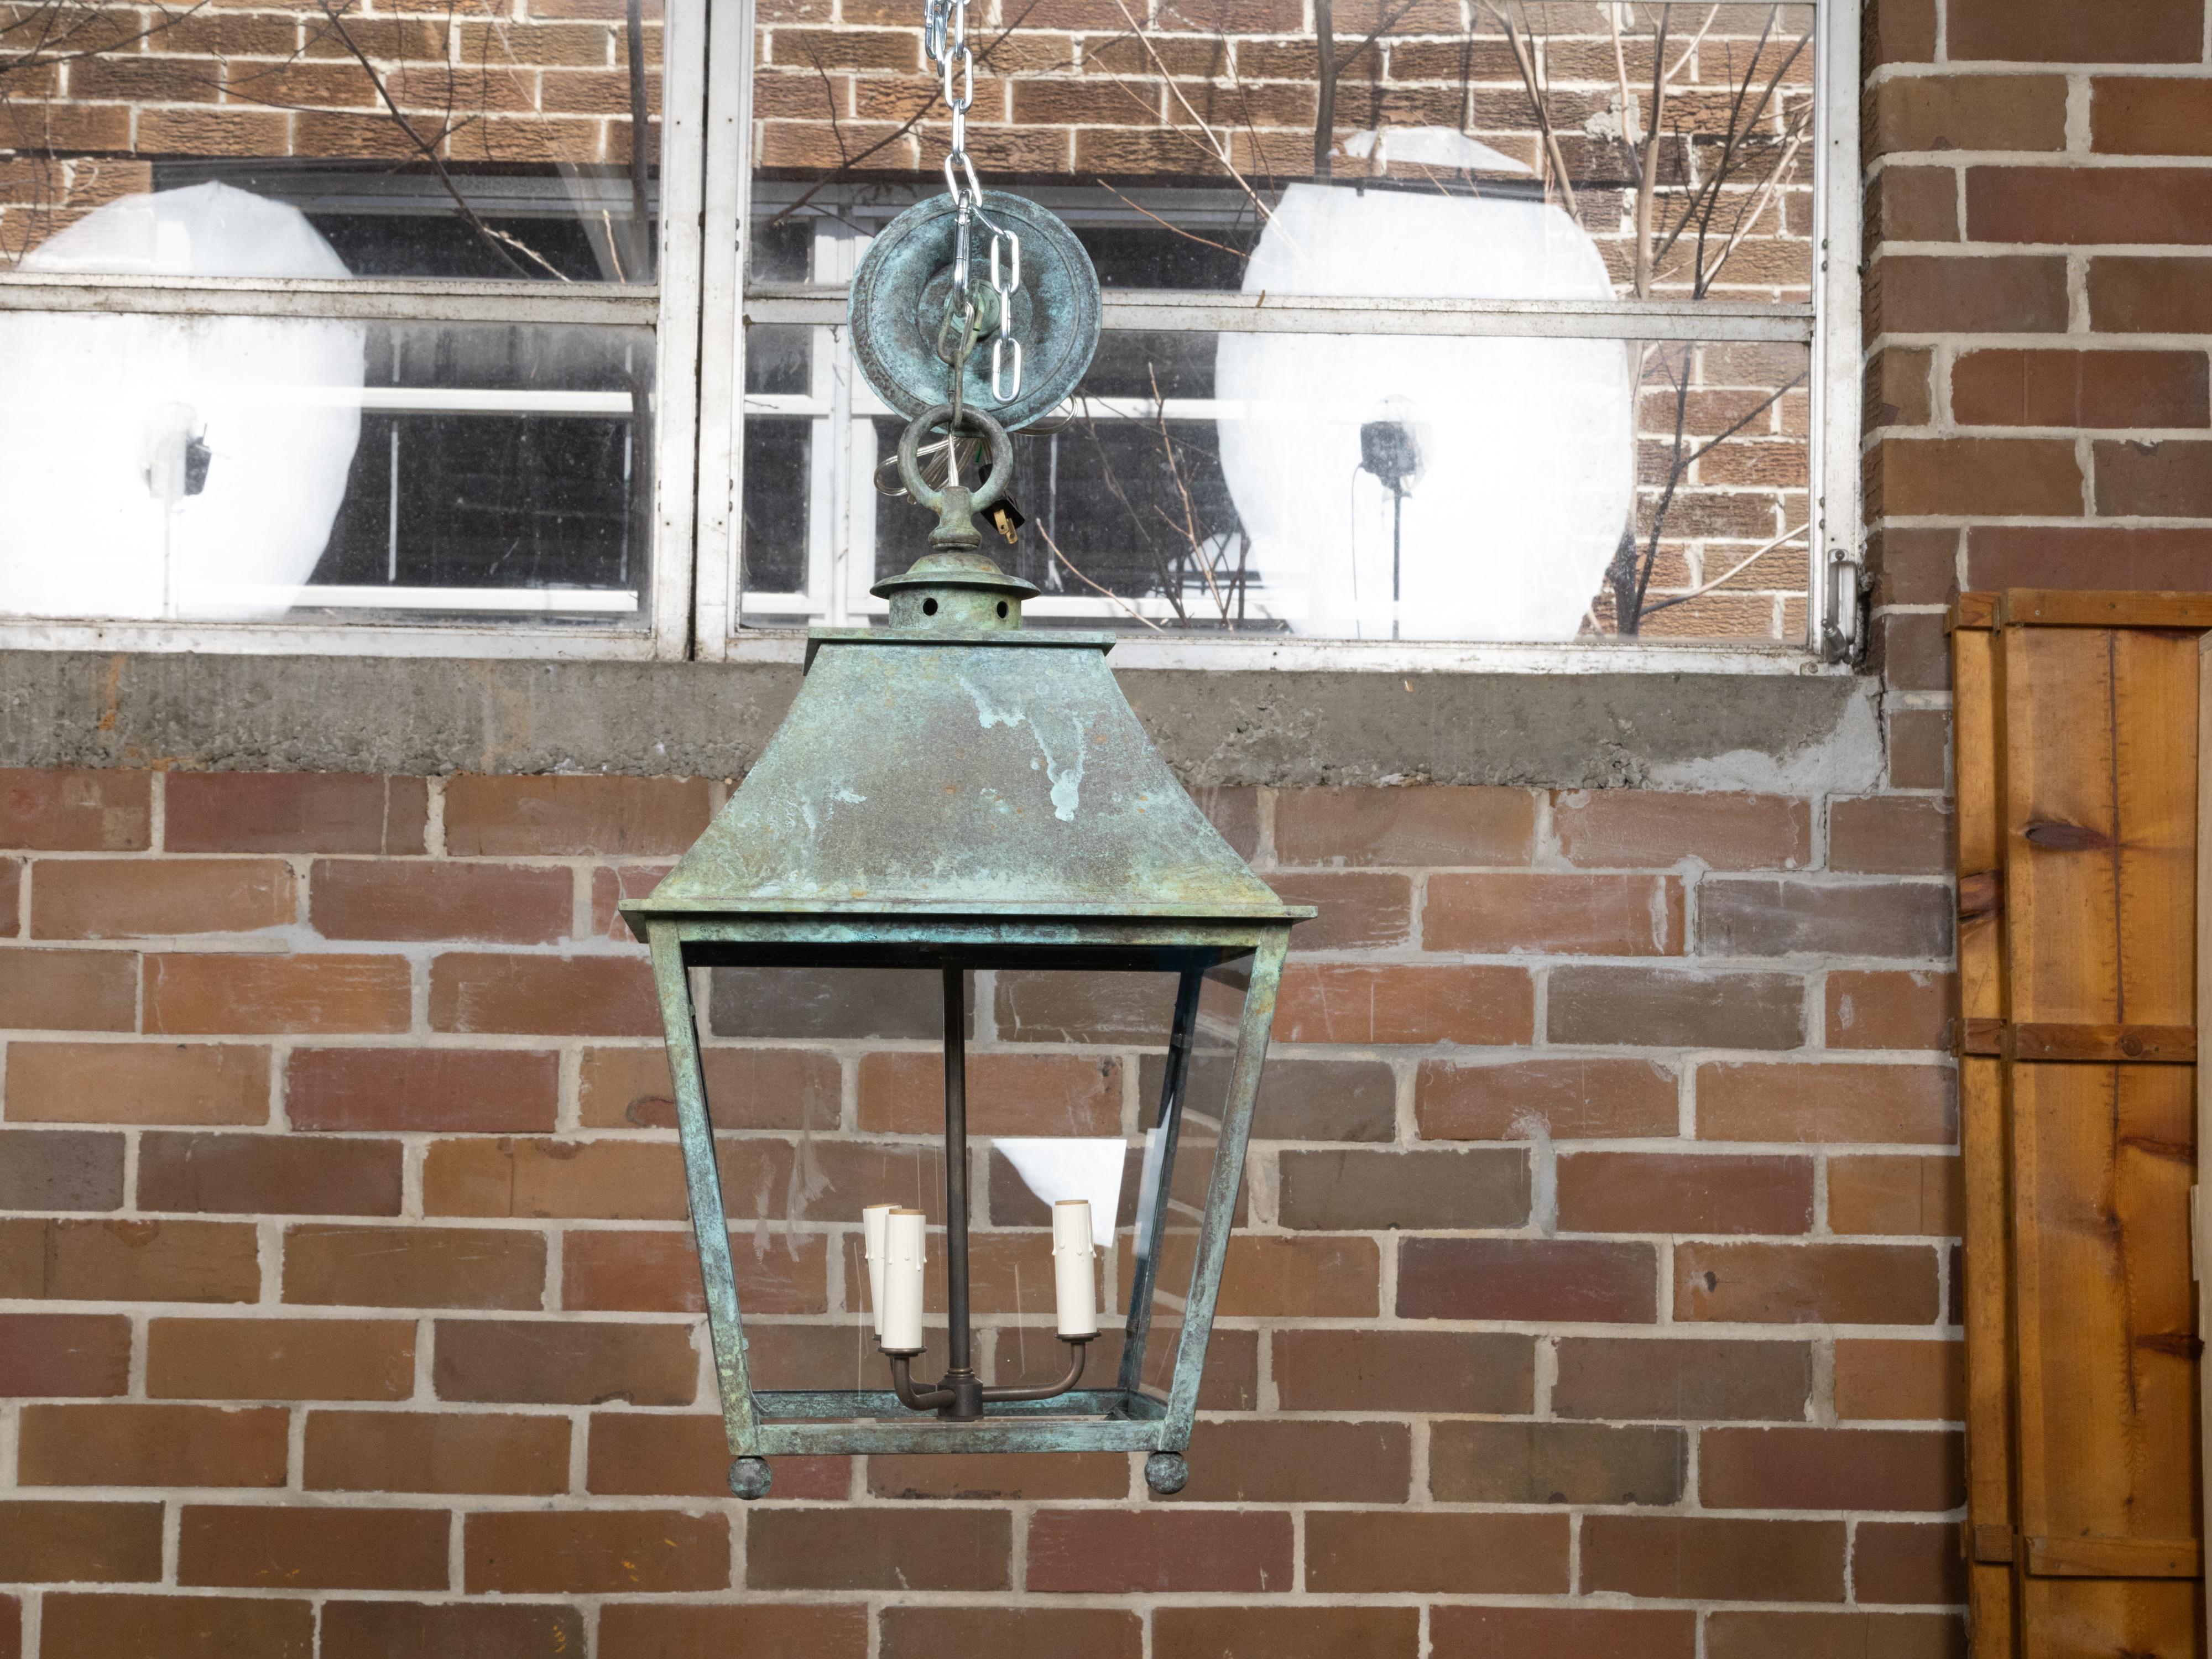 An English copper lantern from the 19th century with glass panels and verdigris patina. This 19th-century English copper lantern, exquisitely showcasing a verdigris patina, brings a piece of historical elegance into the modern home. The lantern's